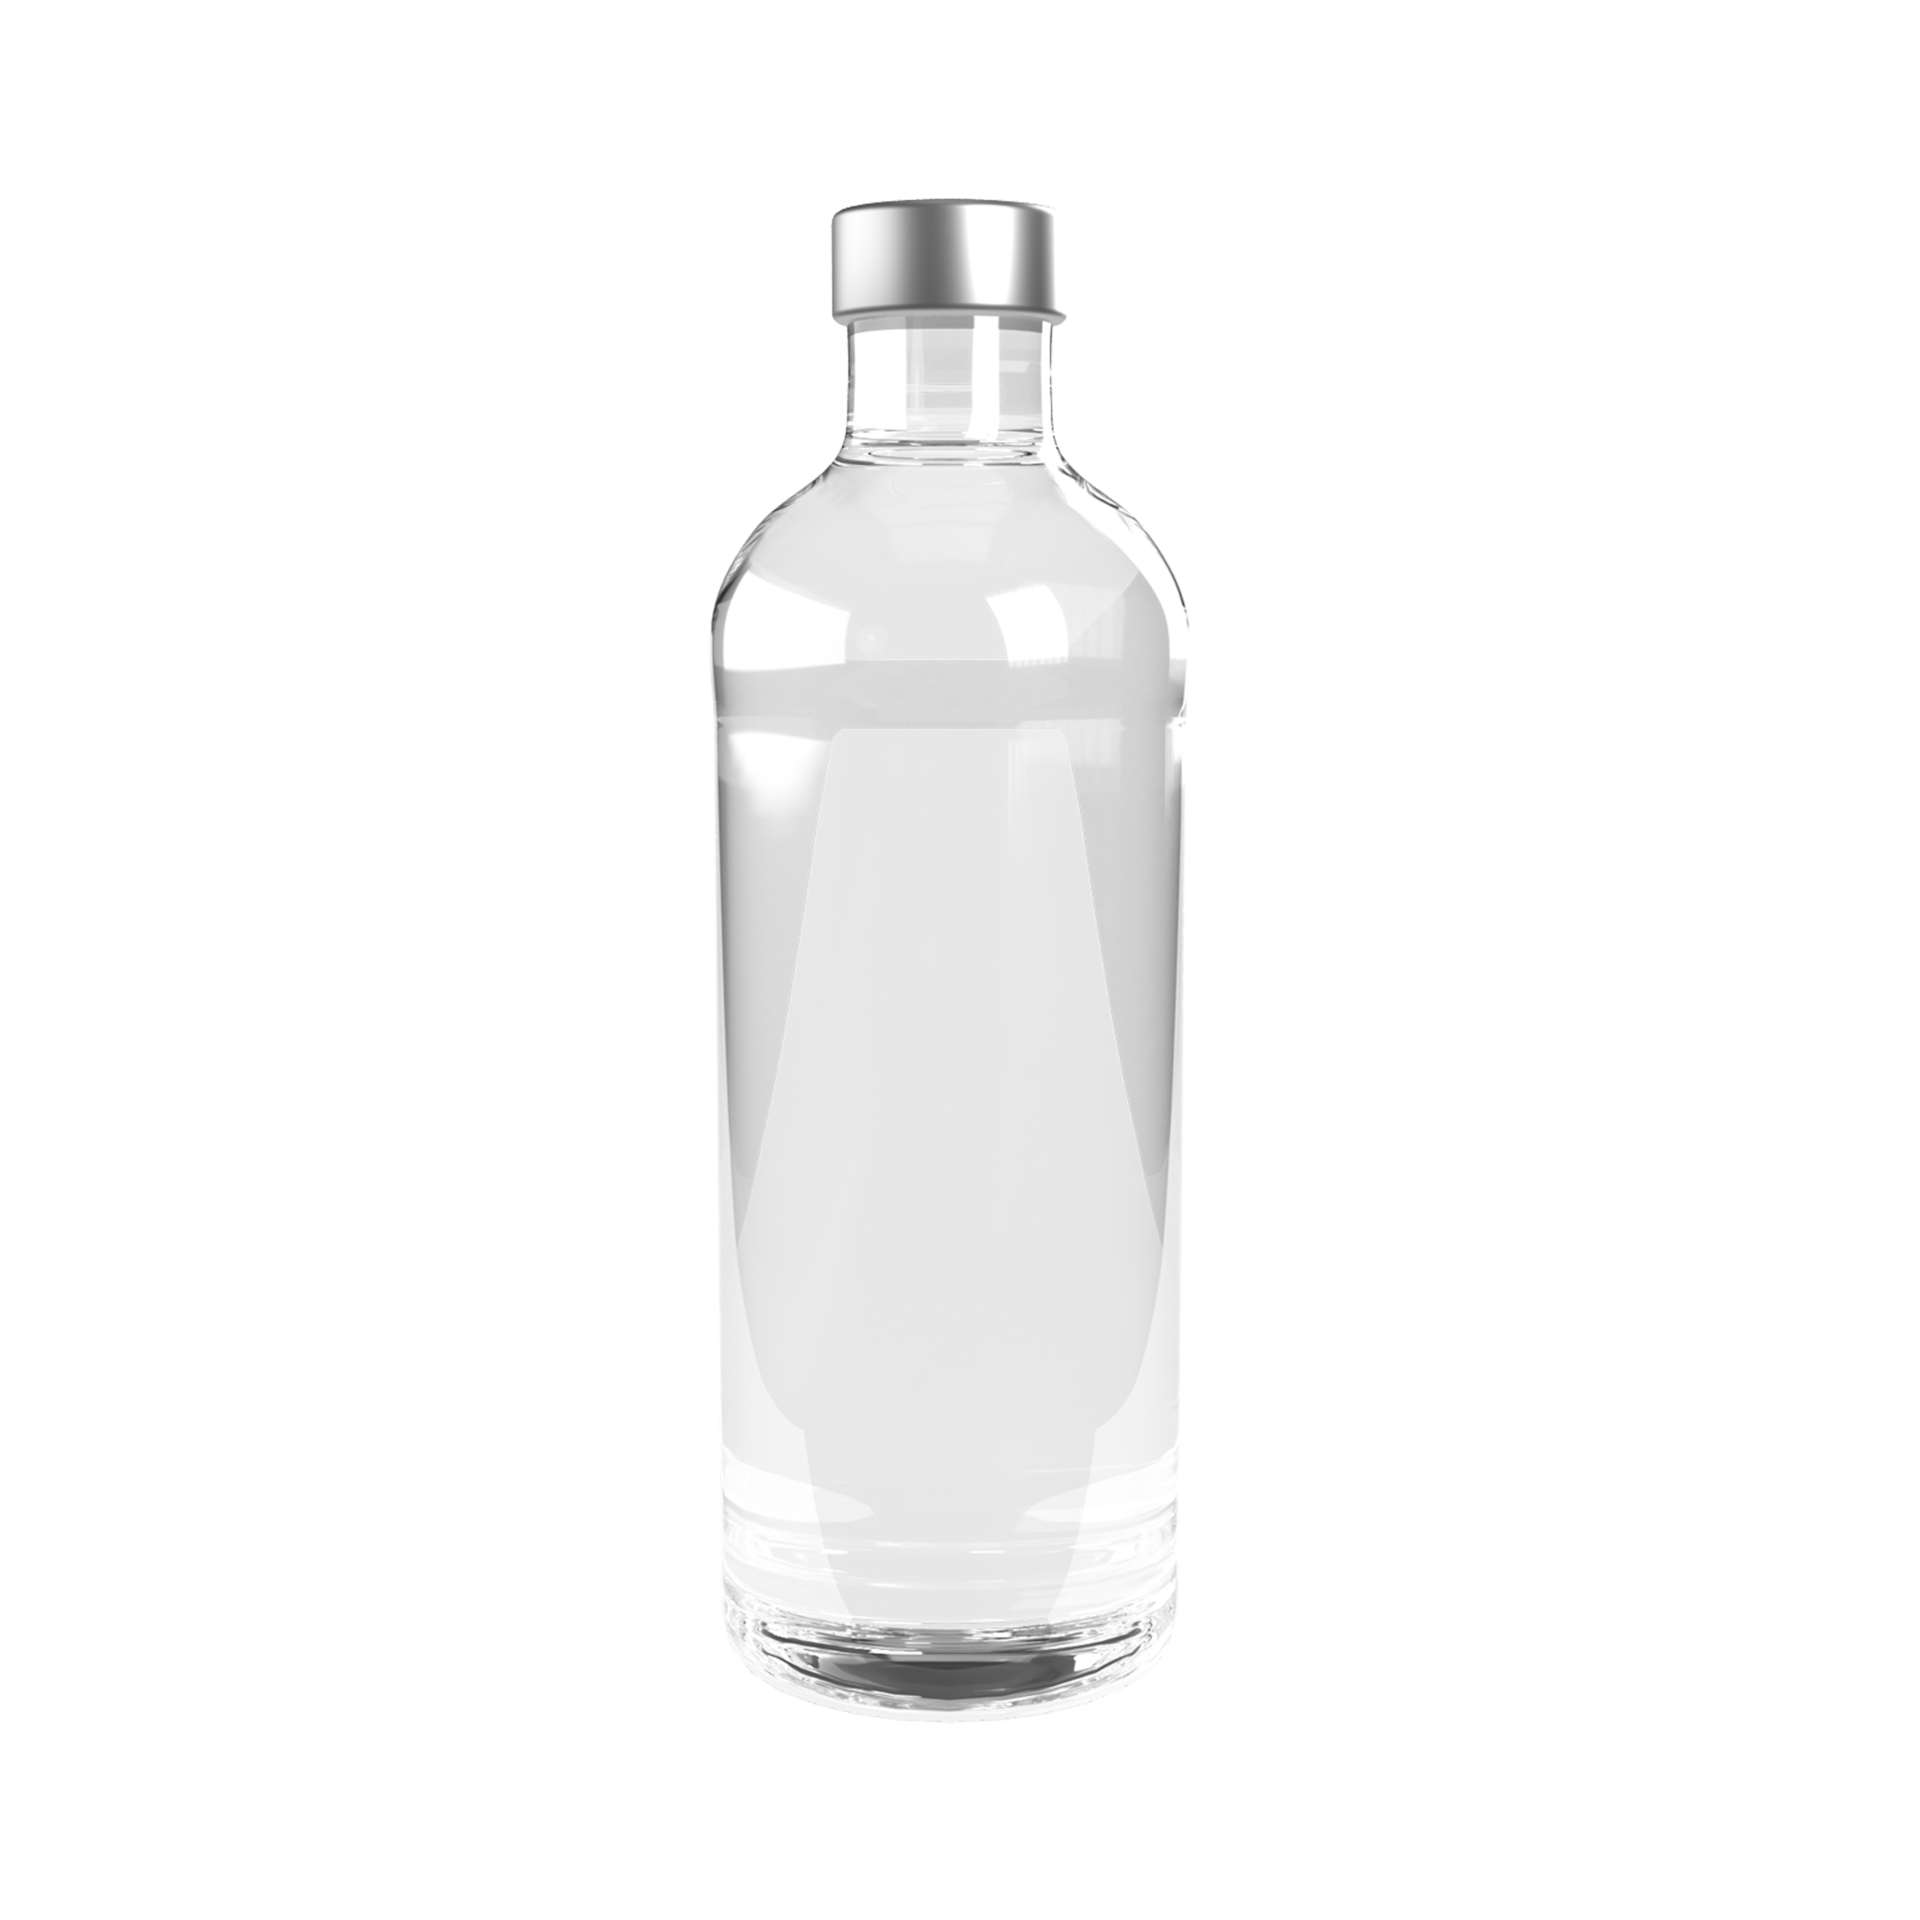 https://static.vecteezy.com/system/resources/previews/012/898/669/original/glass-modern-water-bottle-transparent-png.png